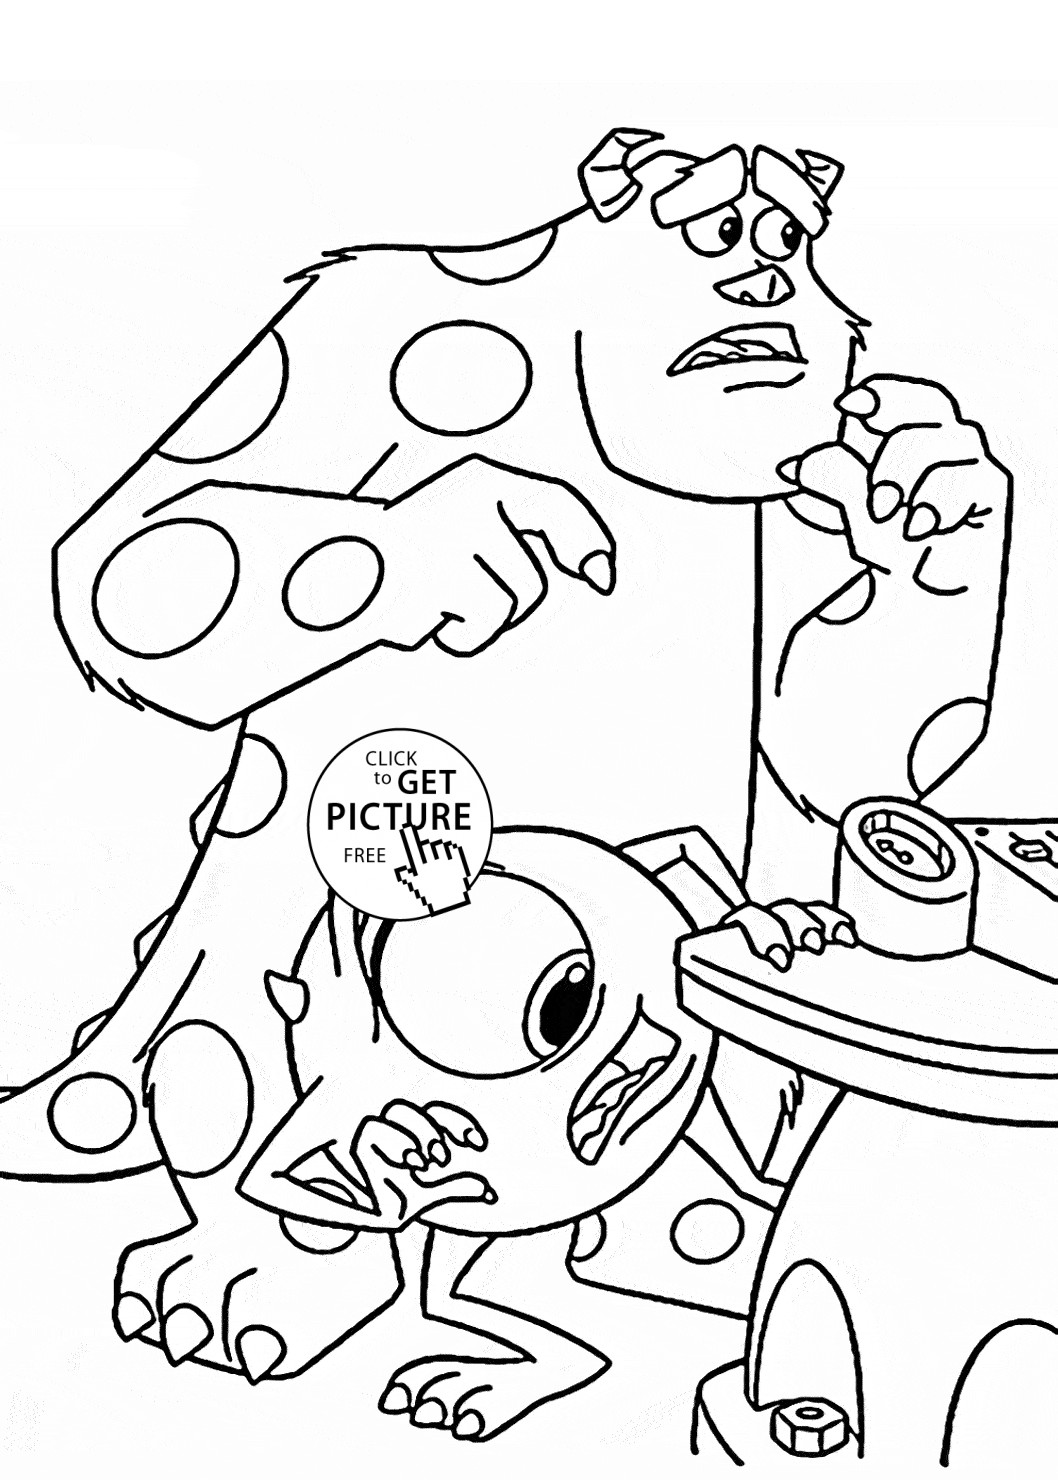 Disney Coloring Sheets For Kids
 Printable Coloring Pages For Kids Disney – Color Bros